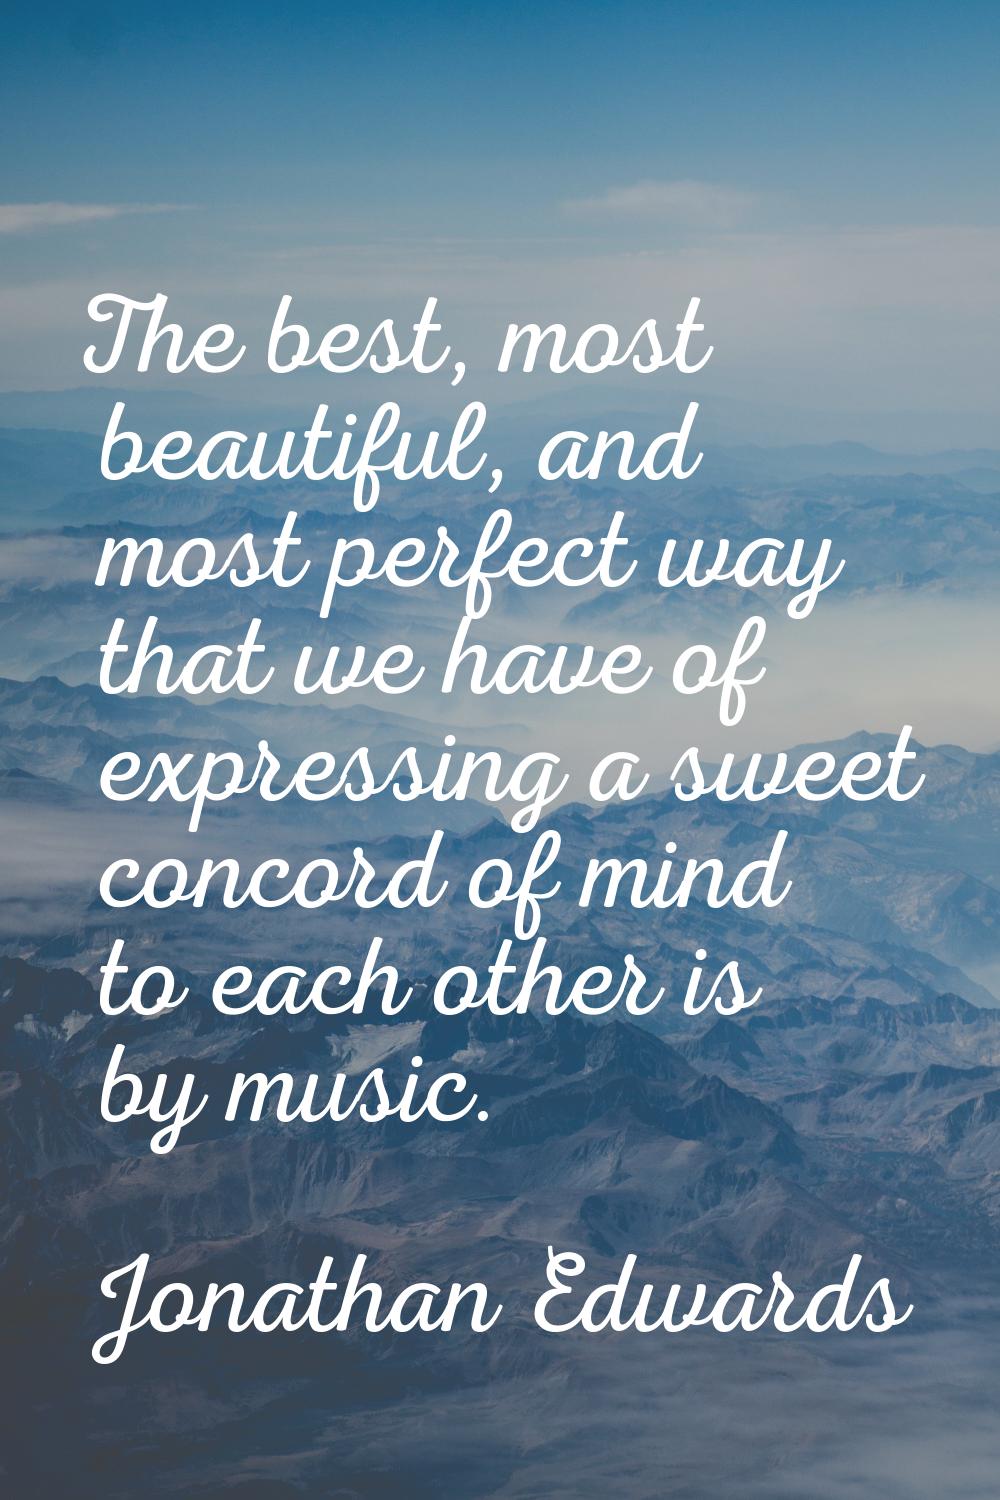 The best, most beautiful, and most perfect way that we have of expressing a sweet concord of mind t